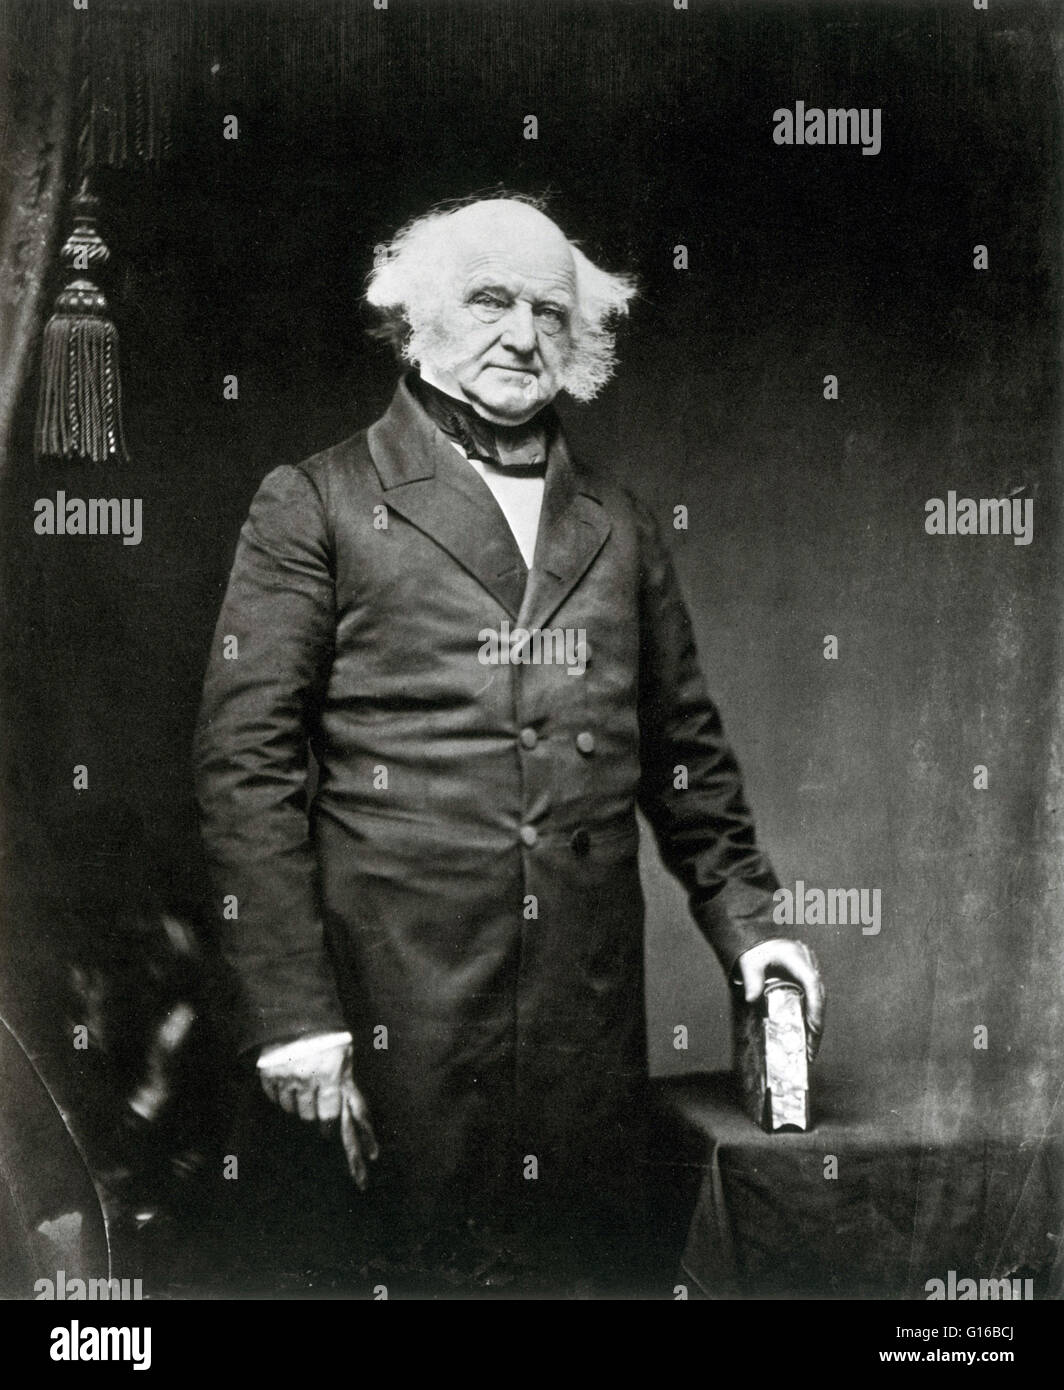 Martin Van Buren (December 5, 1782 - July 24, 1862) was the eighth President of the United States (1837-1841). Before his presidency, he was the eighth Vice President (1833-1837) and the tenth Secretary of State (1829-1831), both under Andrew Jackson. He Stock Photo